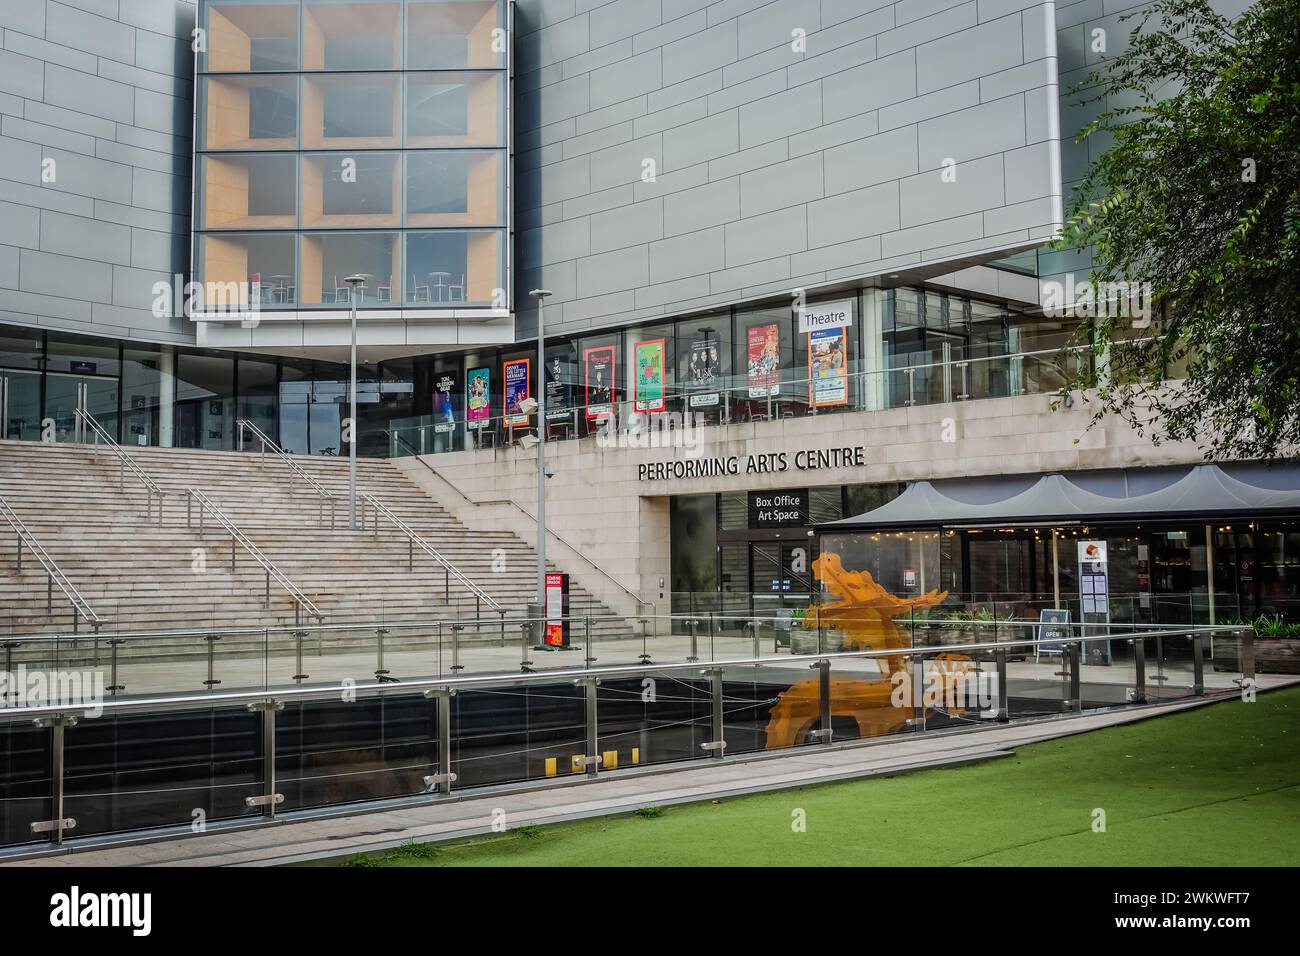 Performing Arts Center in Chatswood, NSW, Australien. Stockfoto